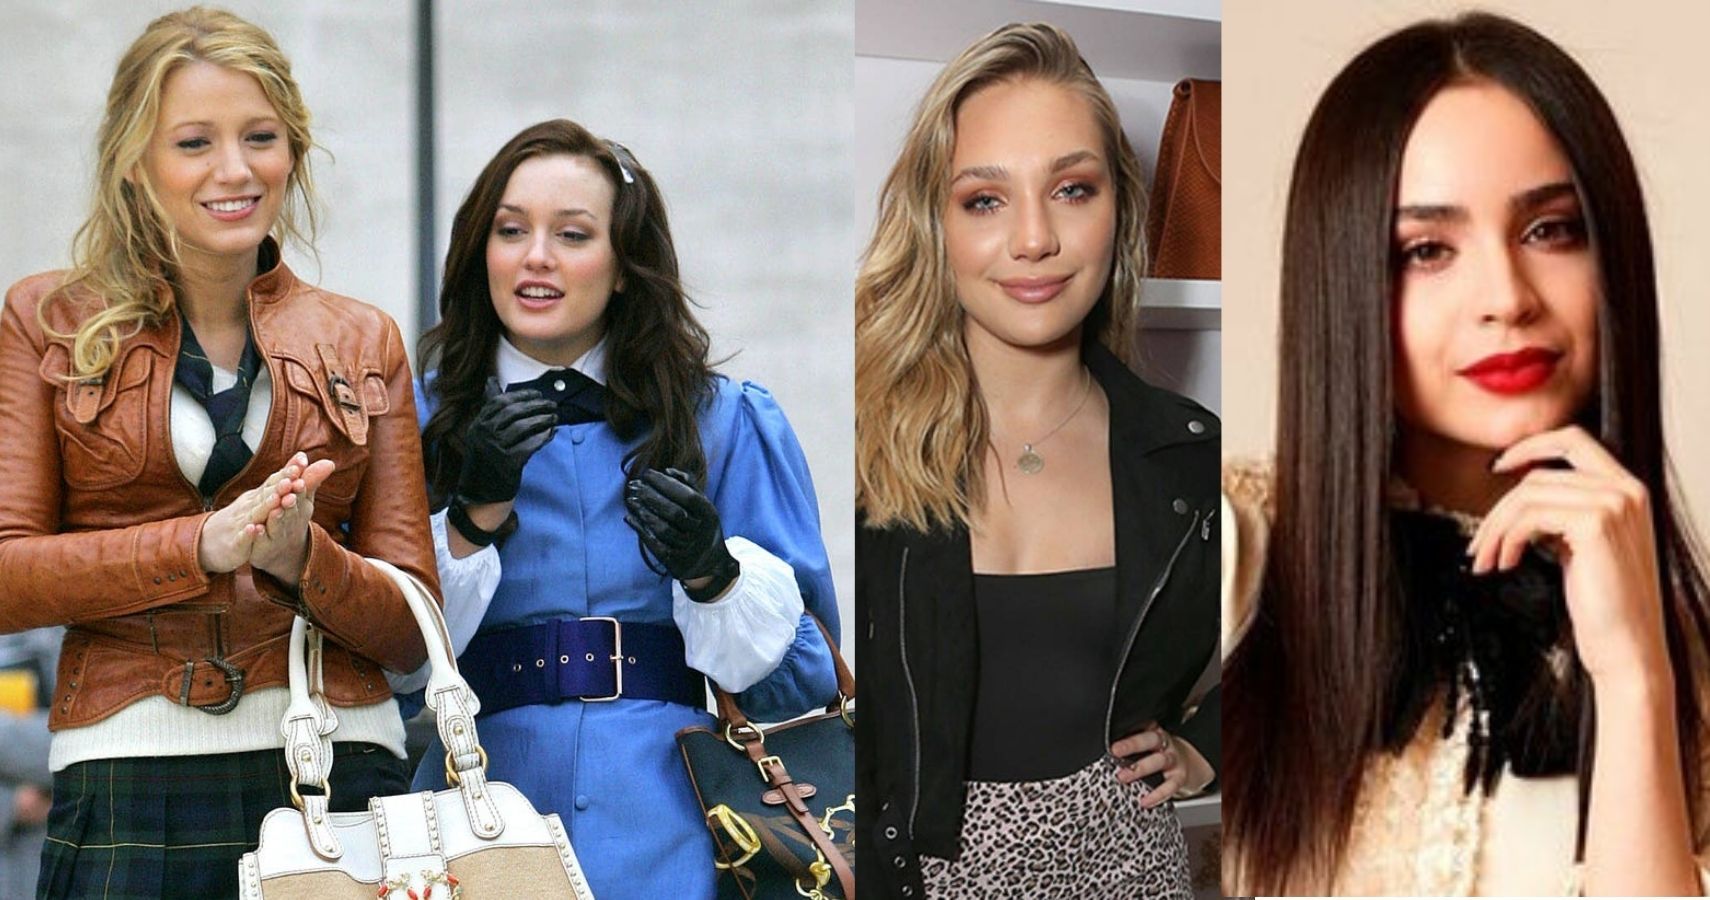 This new Netflix show is Gossip Girl meets Skins and we are HERE for it 